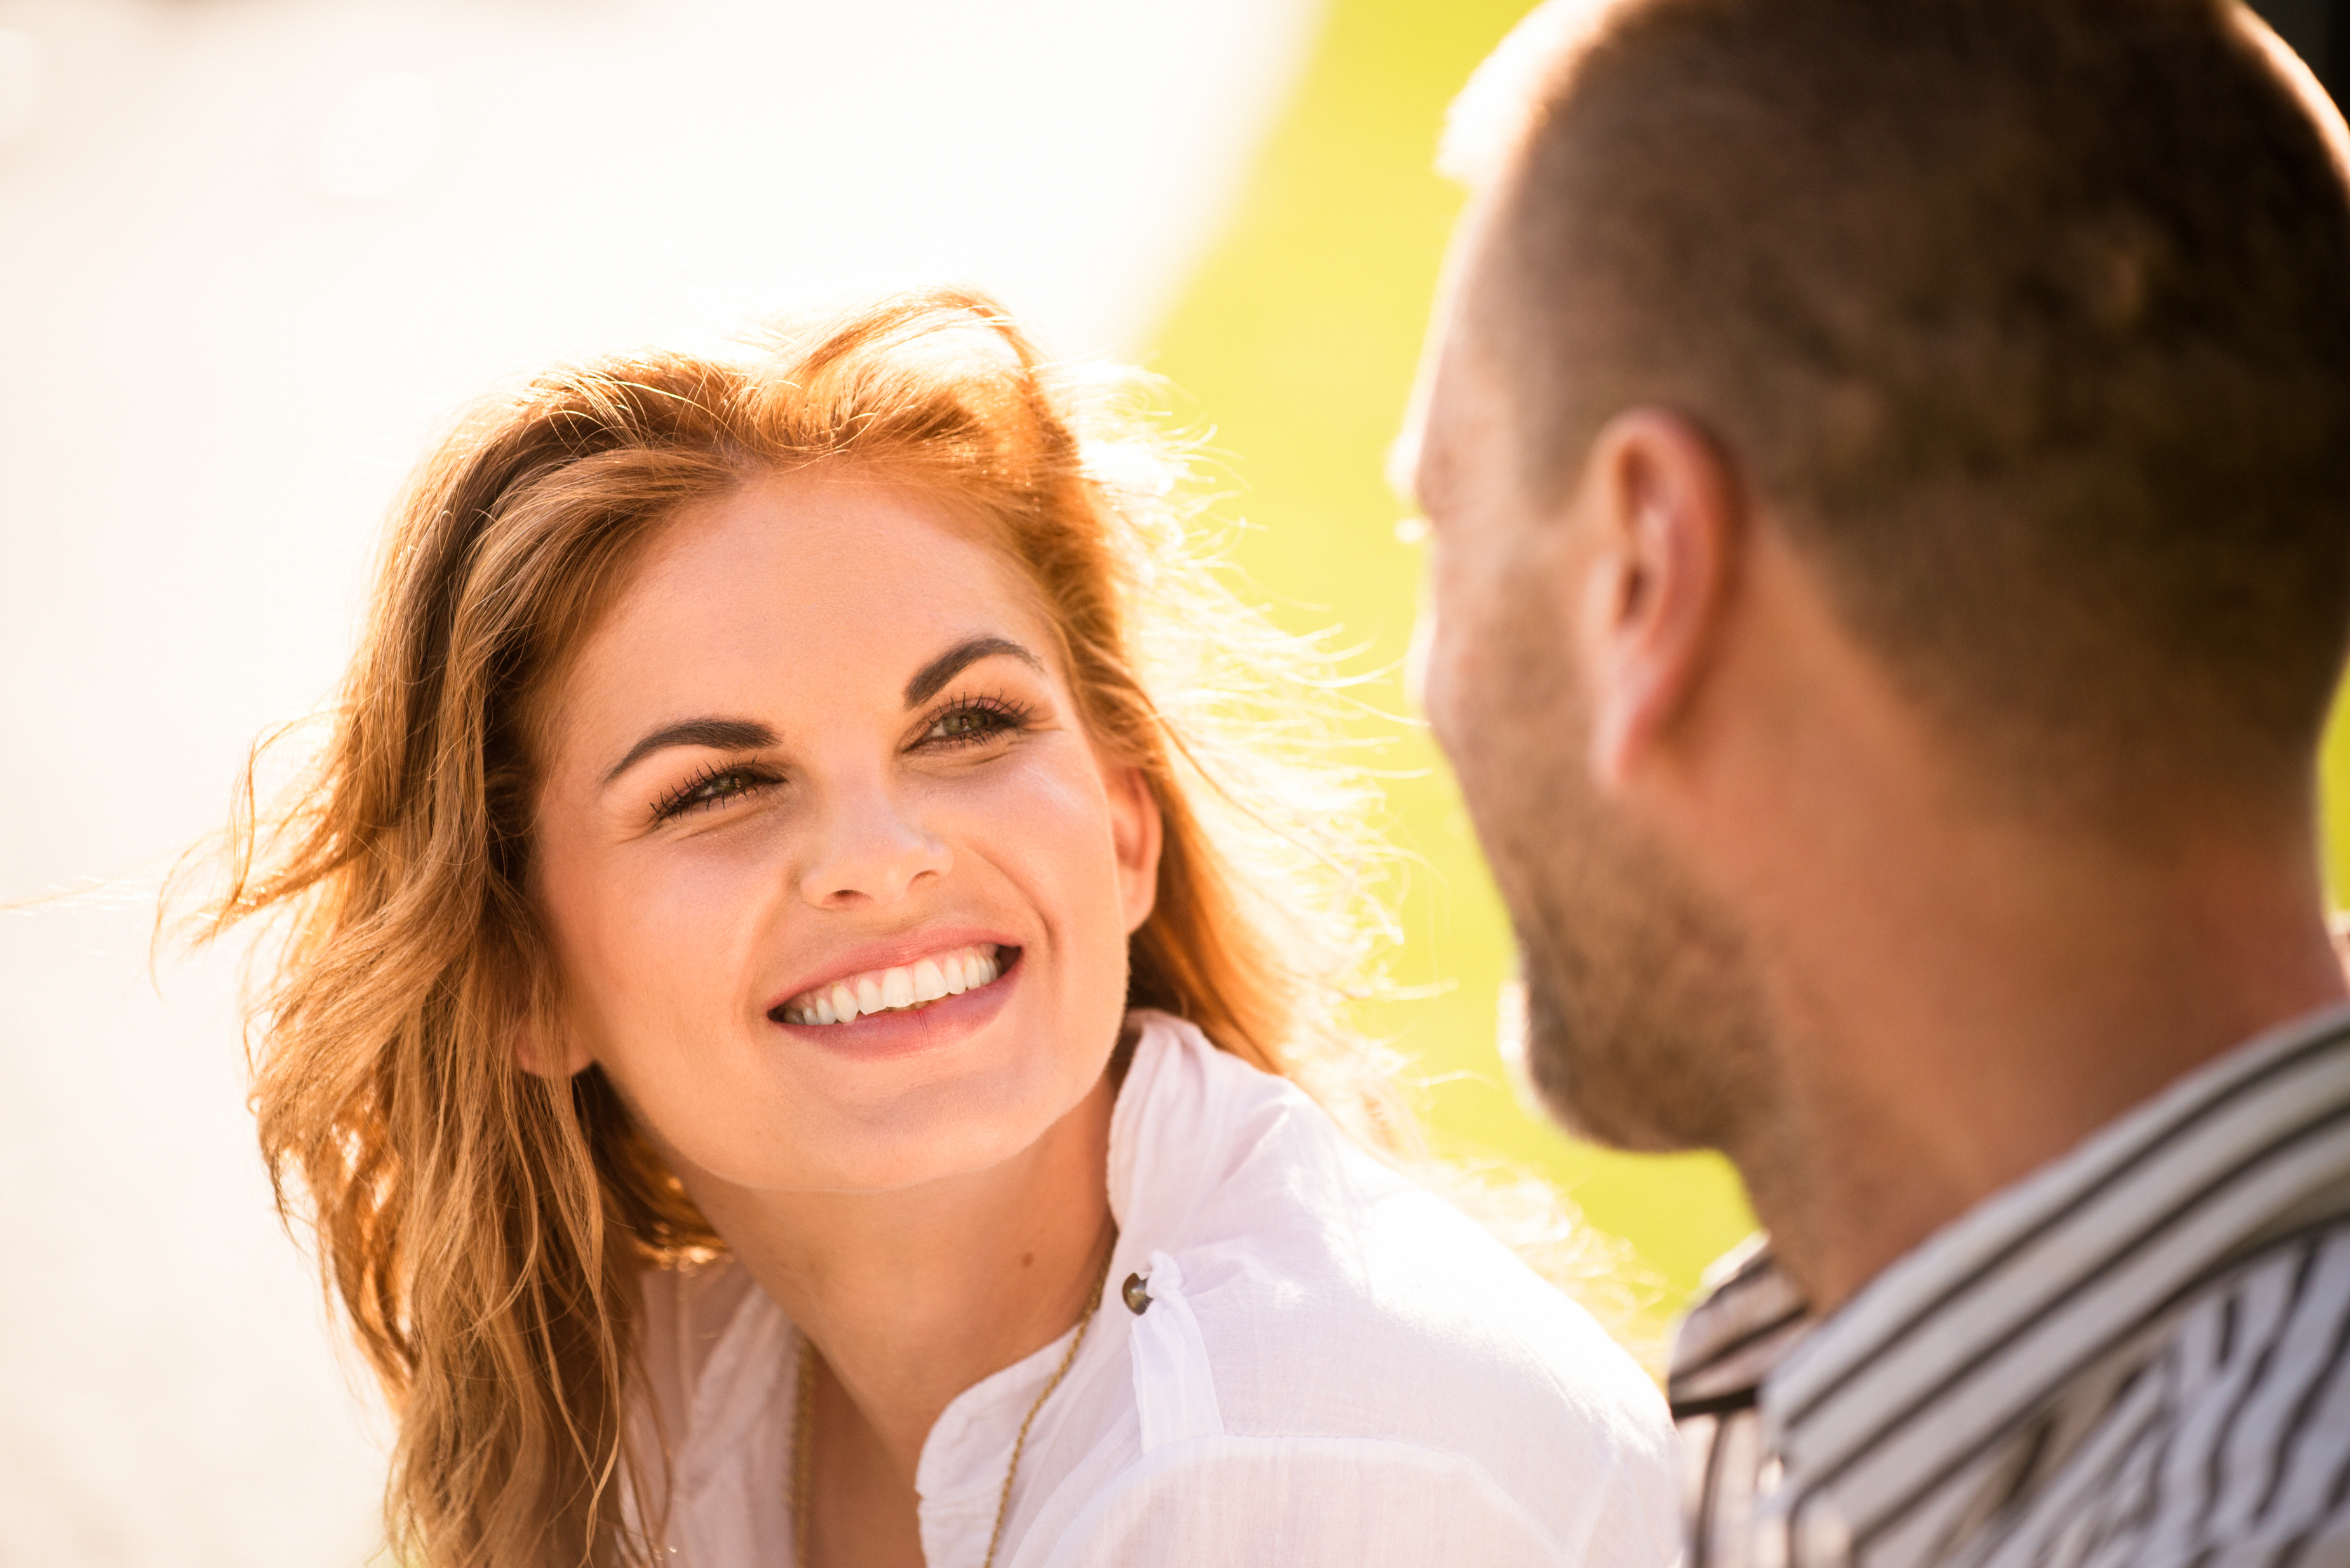 Smiling young woman | Source: Shutterstock